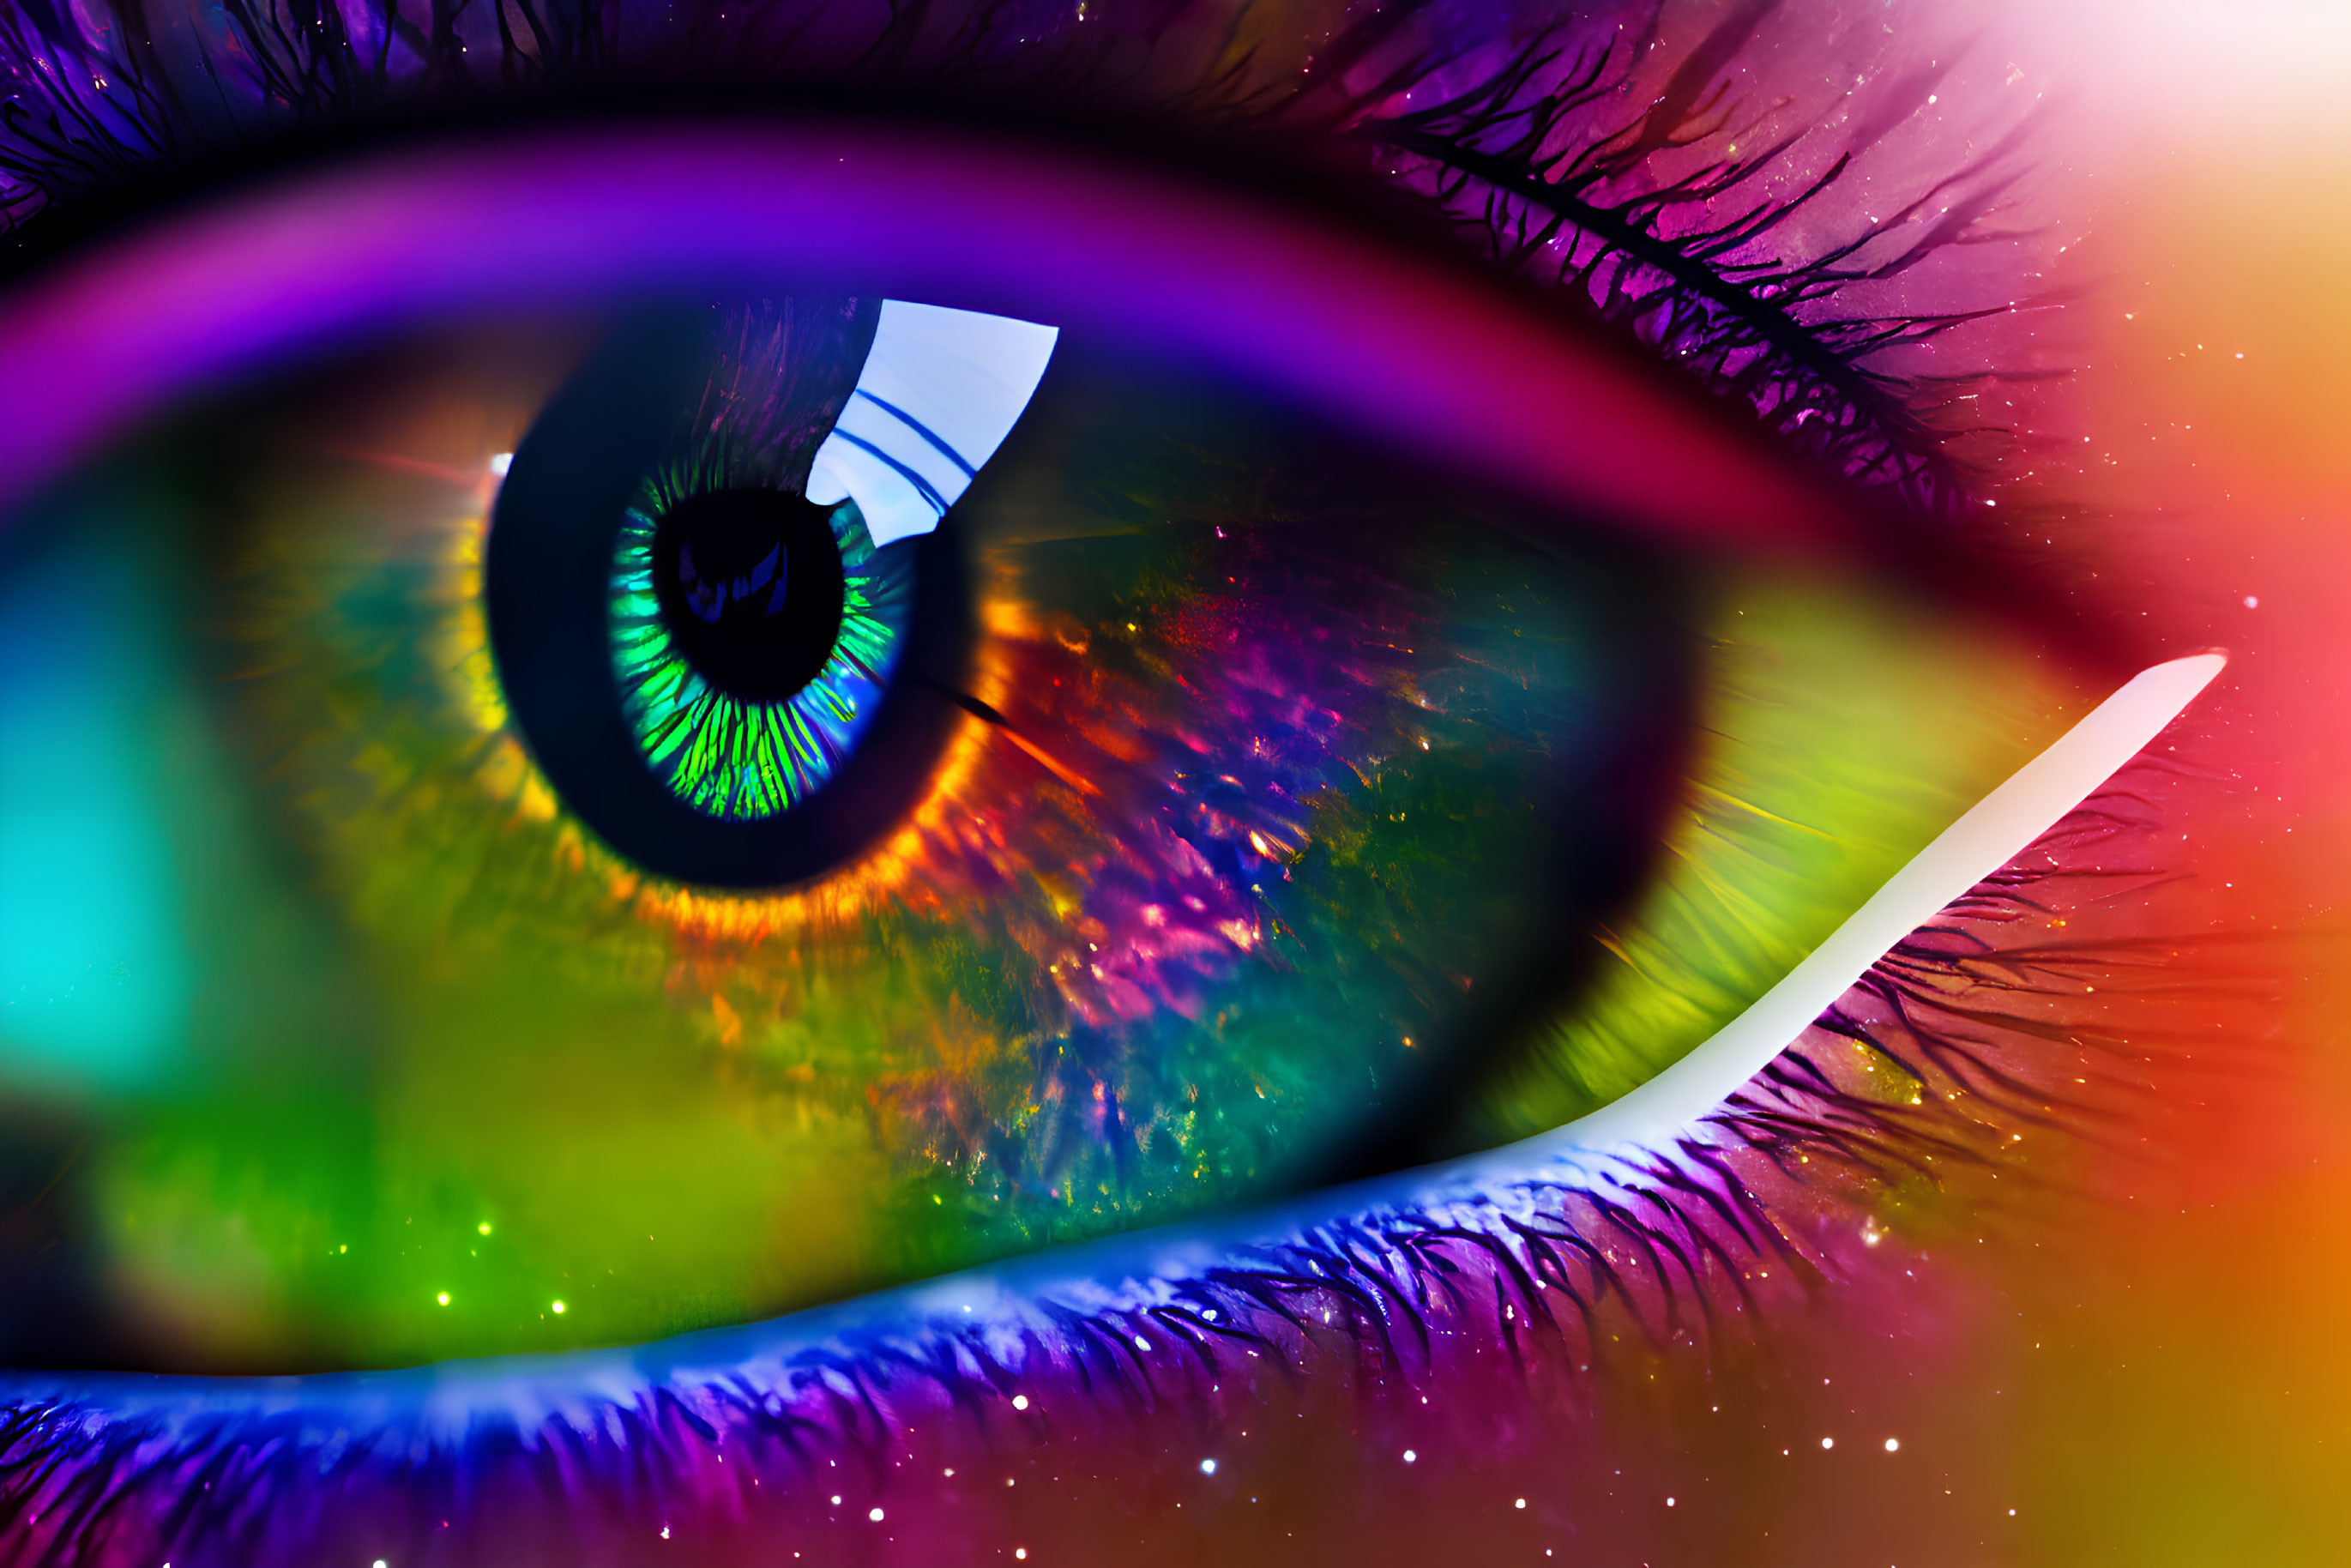 Colorful Stylized Human Eye Close-Up with Vibrant Hues and Detailed Textures